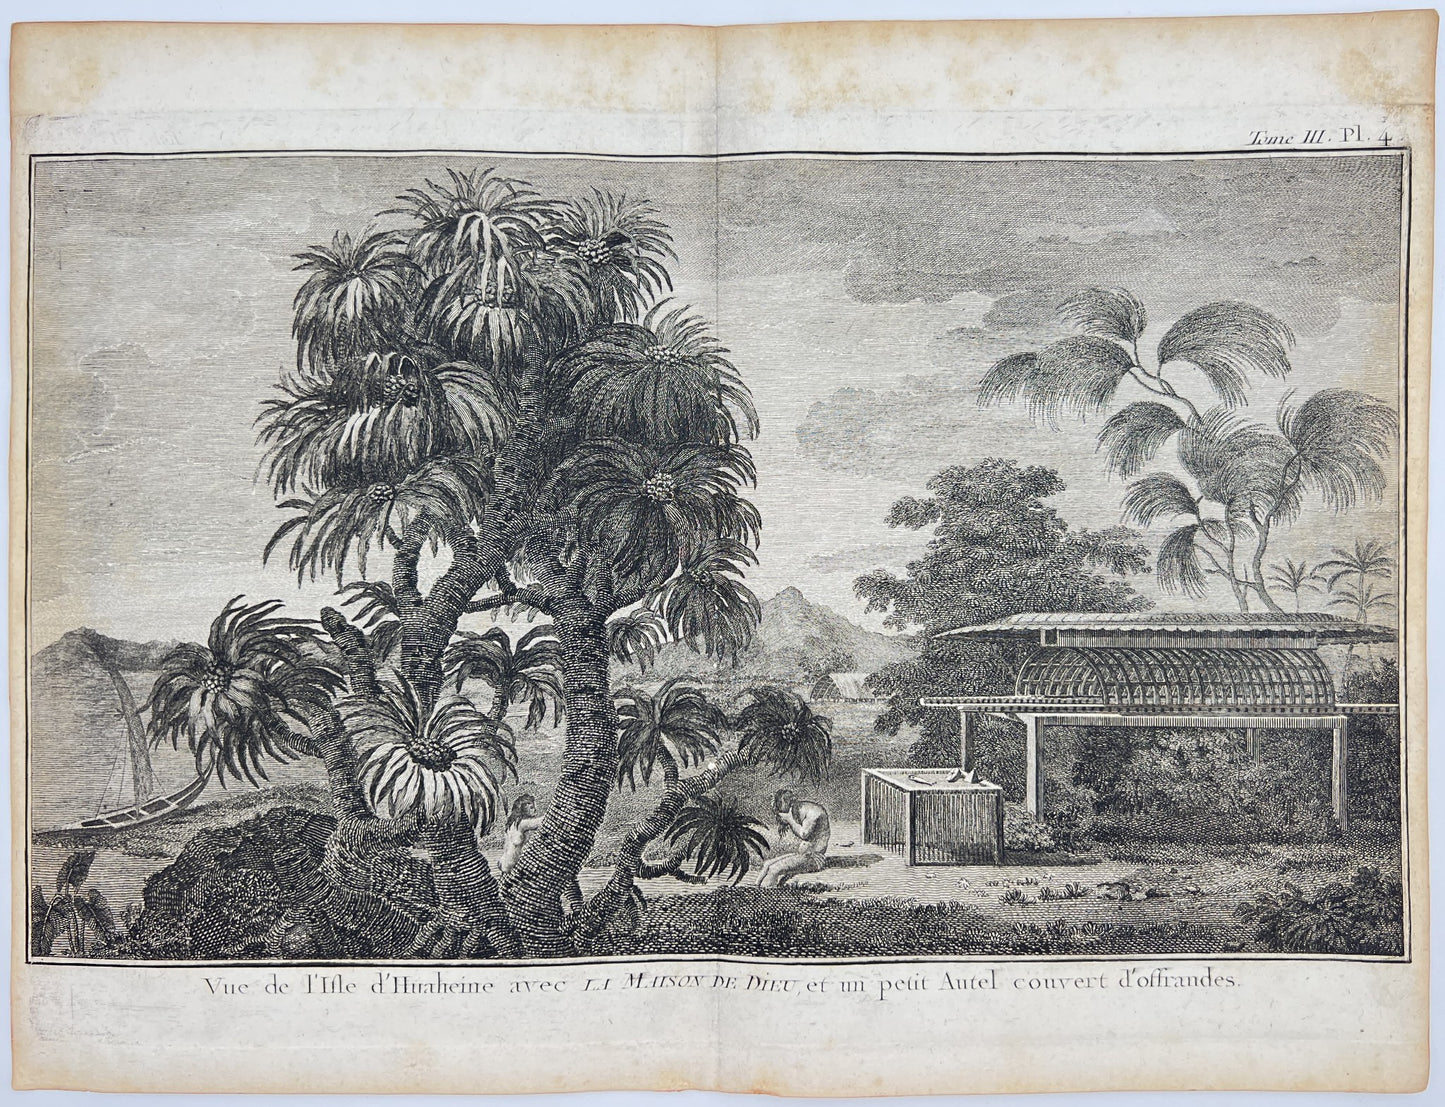 Antique Engraving - Huahine Island - French Polynesian Culture - Captain Cook